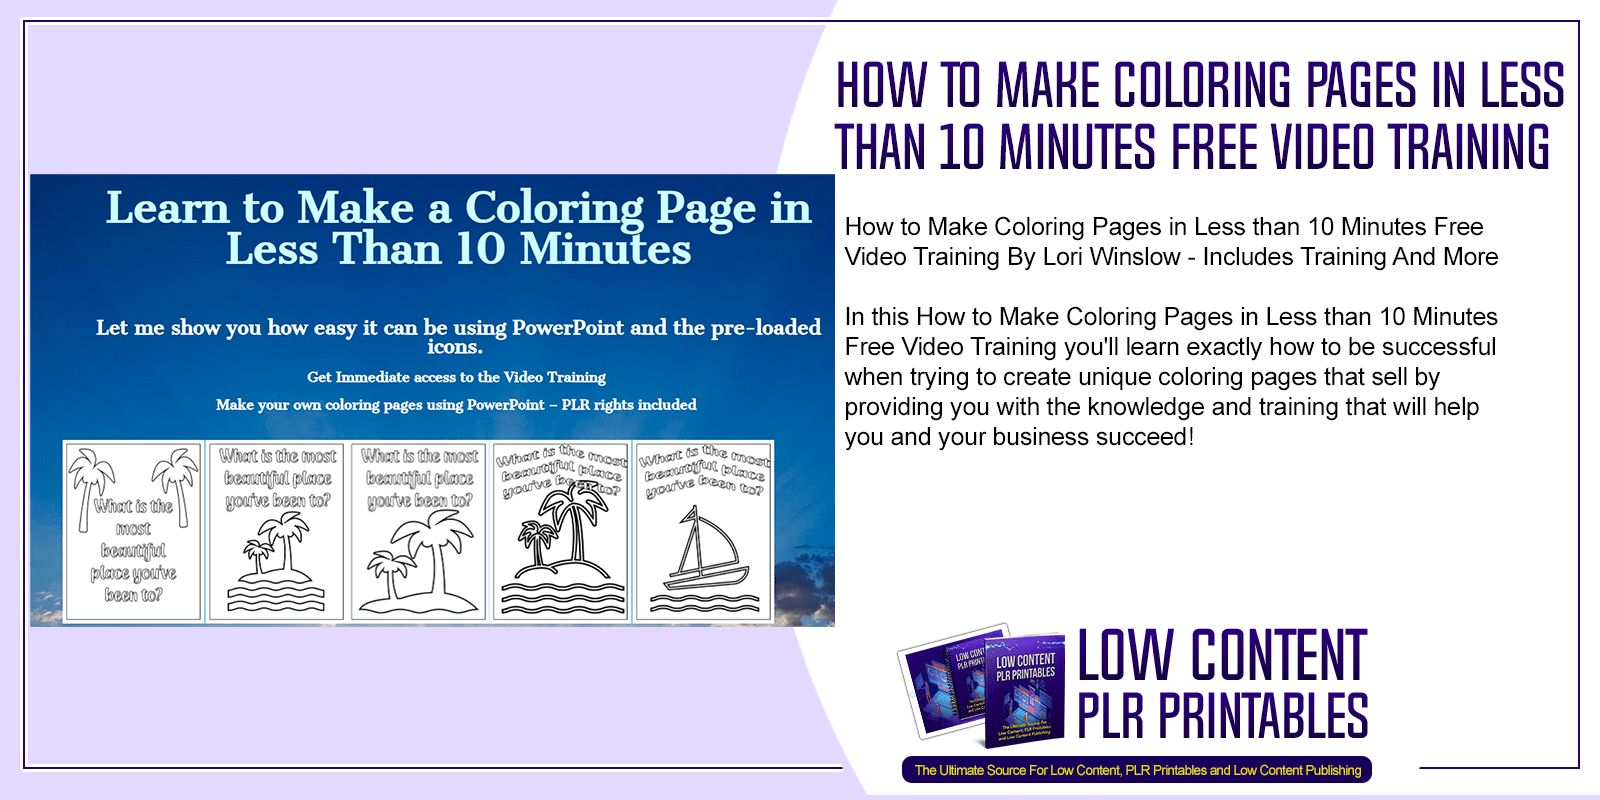 How to Make Coloring Pages in Less than 10 Minutes Free Video Training